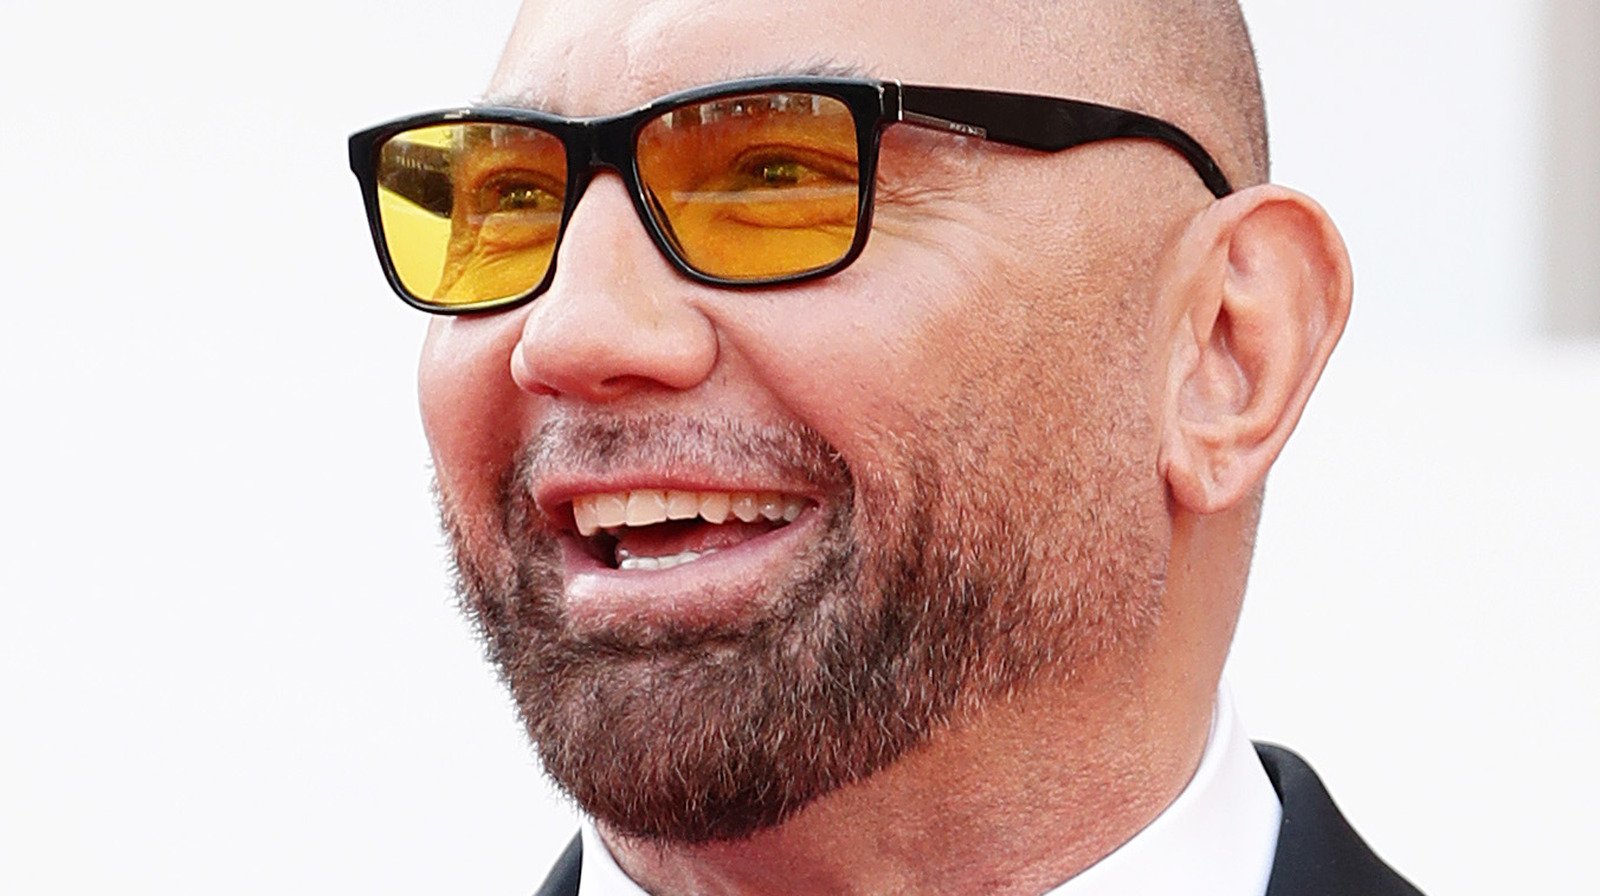 The 7 Best And 7 Worst Dave Bautista Movies - Wrestling Inc.